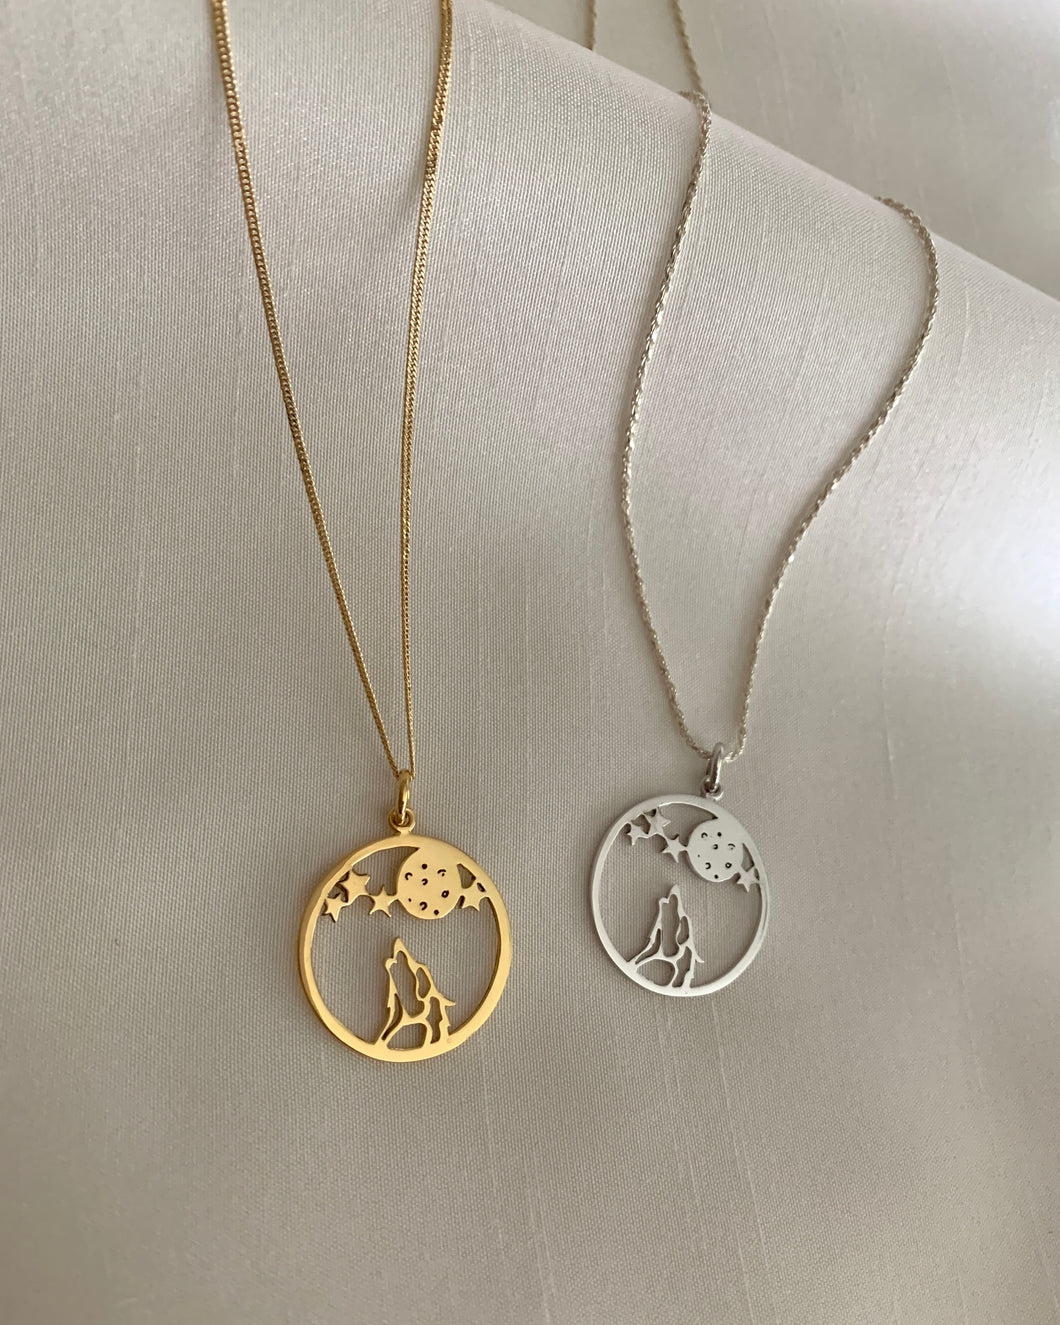 A howling wolf underneath the moon and stars. Set in yellow gold and white gold.